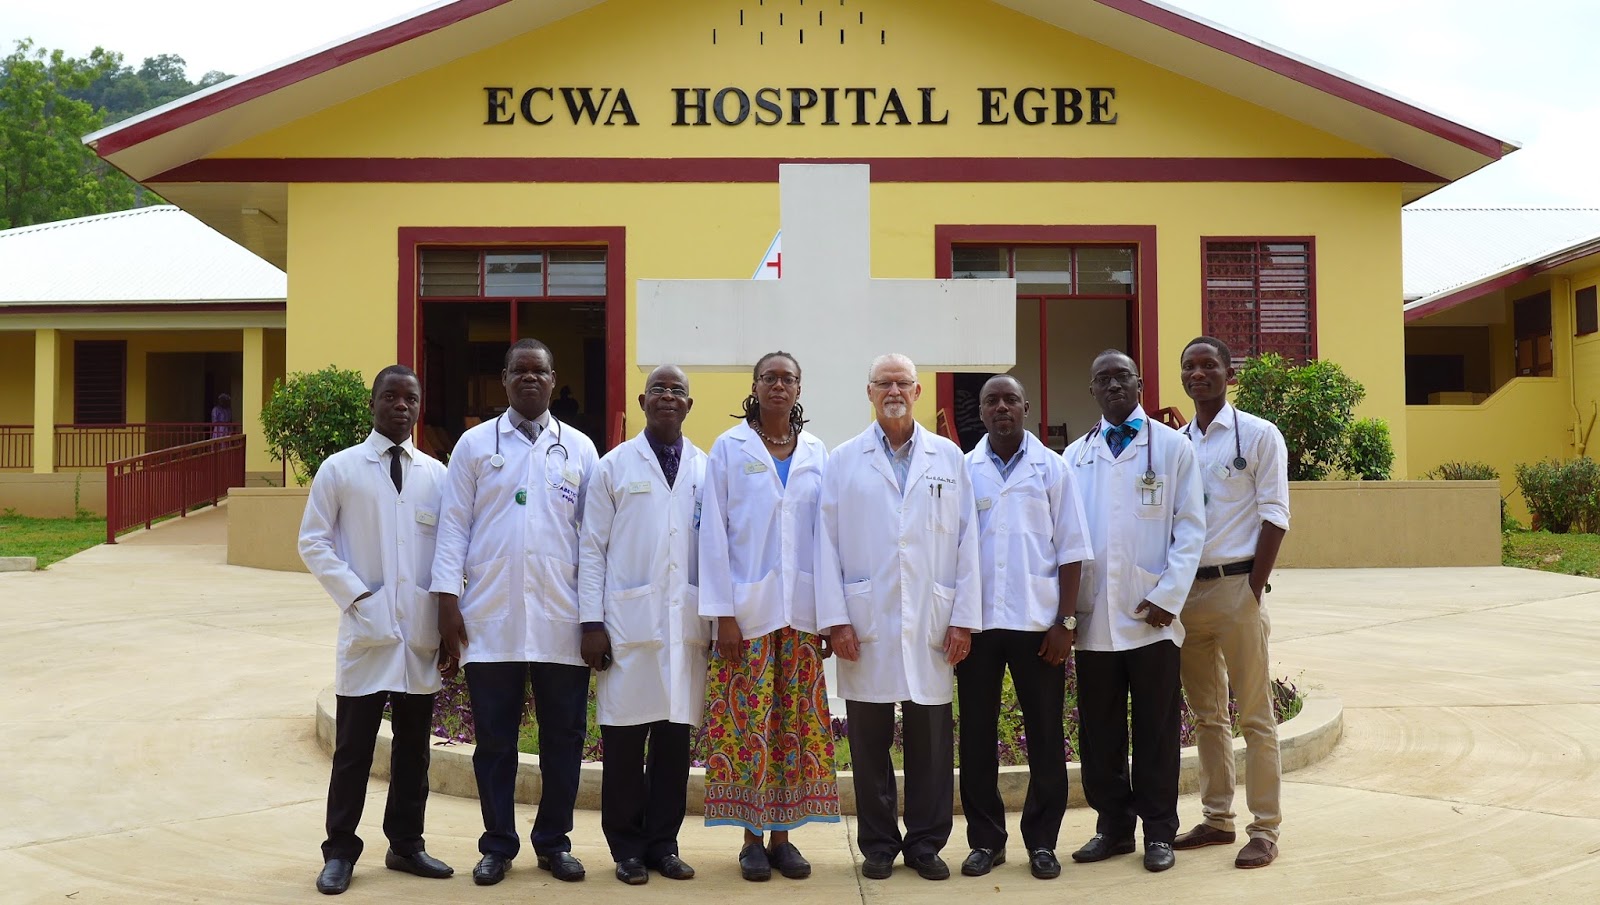 No Better Time Than Now to Serve Your Medical Mission at ECWA Hospital Egbe, Nigeria